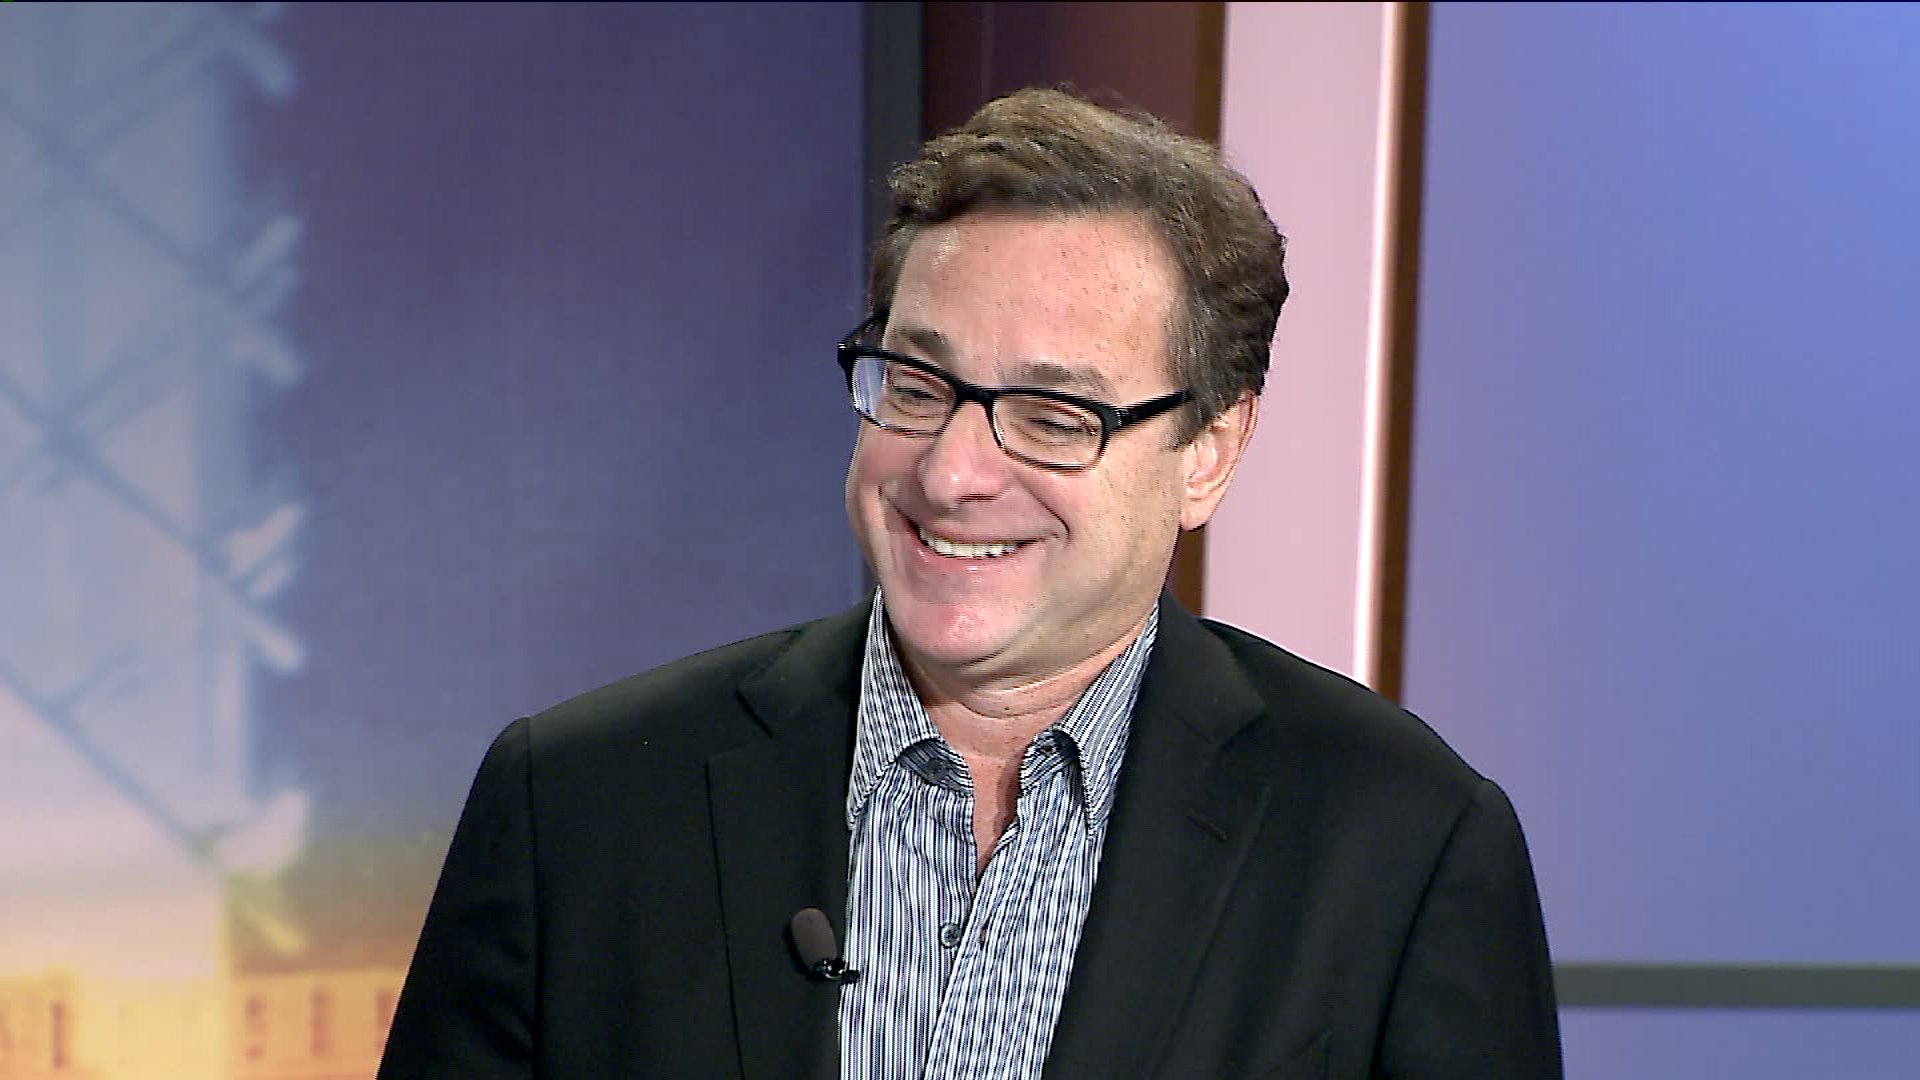 Bob Saget On Legacy Of Full House, 'dirty' Stand Up Comedy